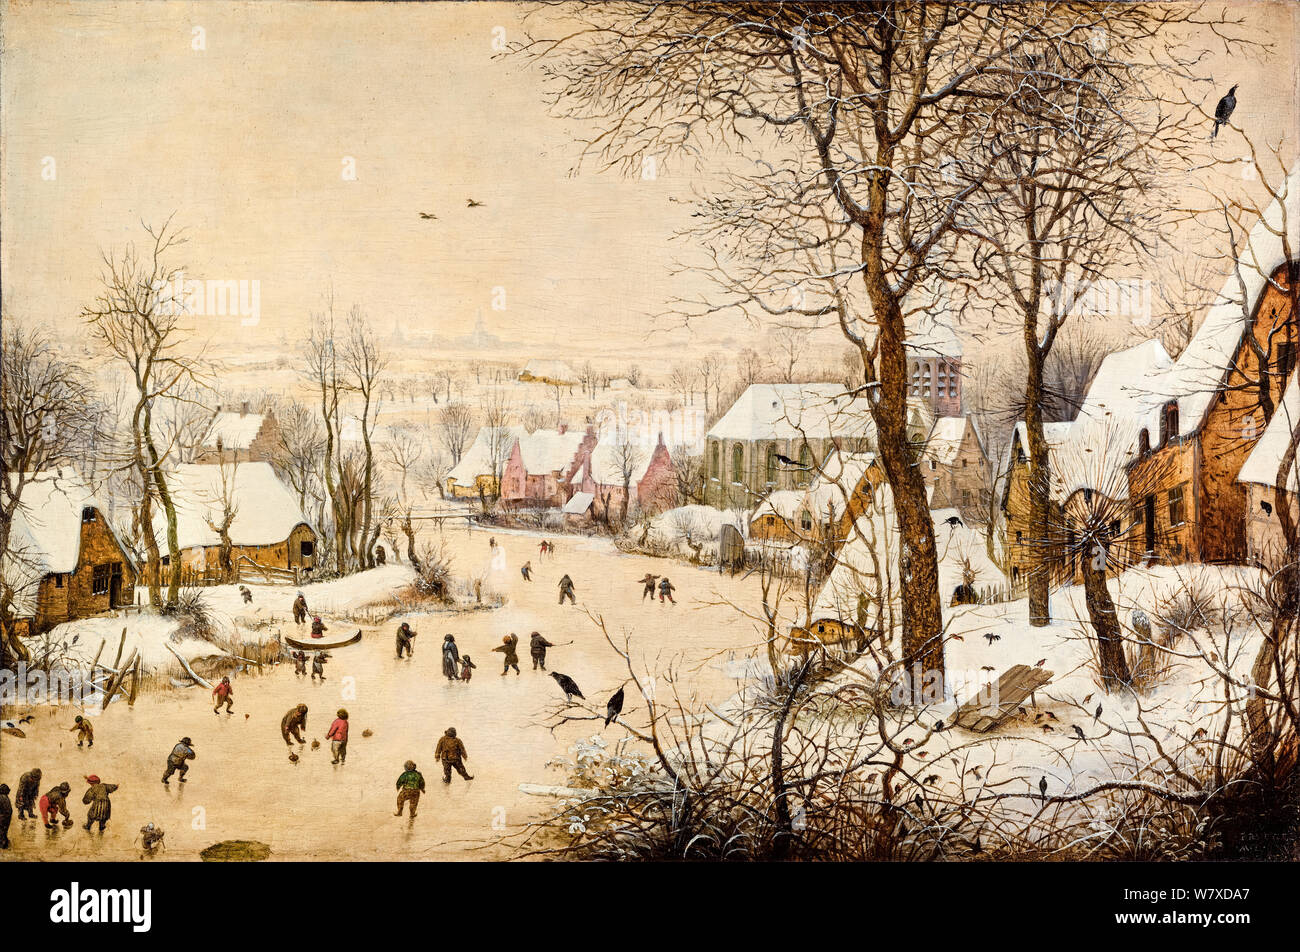 Pieter Bruegel the Elder, painting, Winter Landscape with Ice Skaters and Bird Trap, 1565 Stock Photo